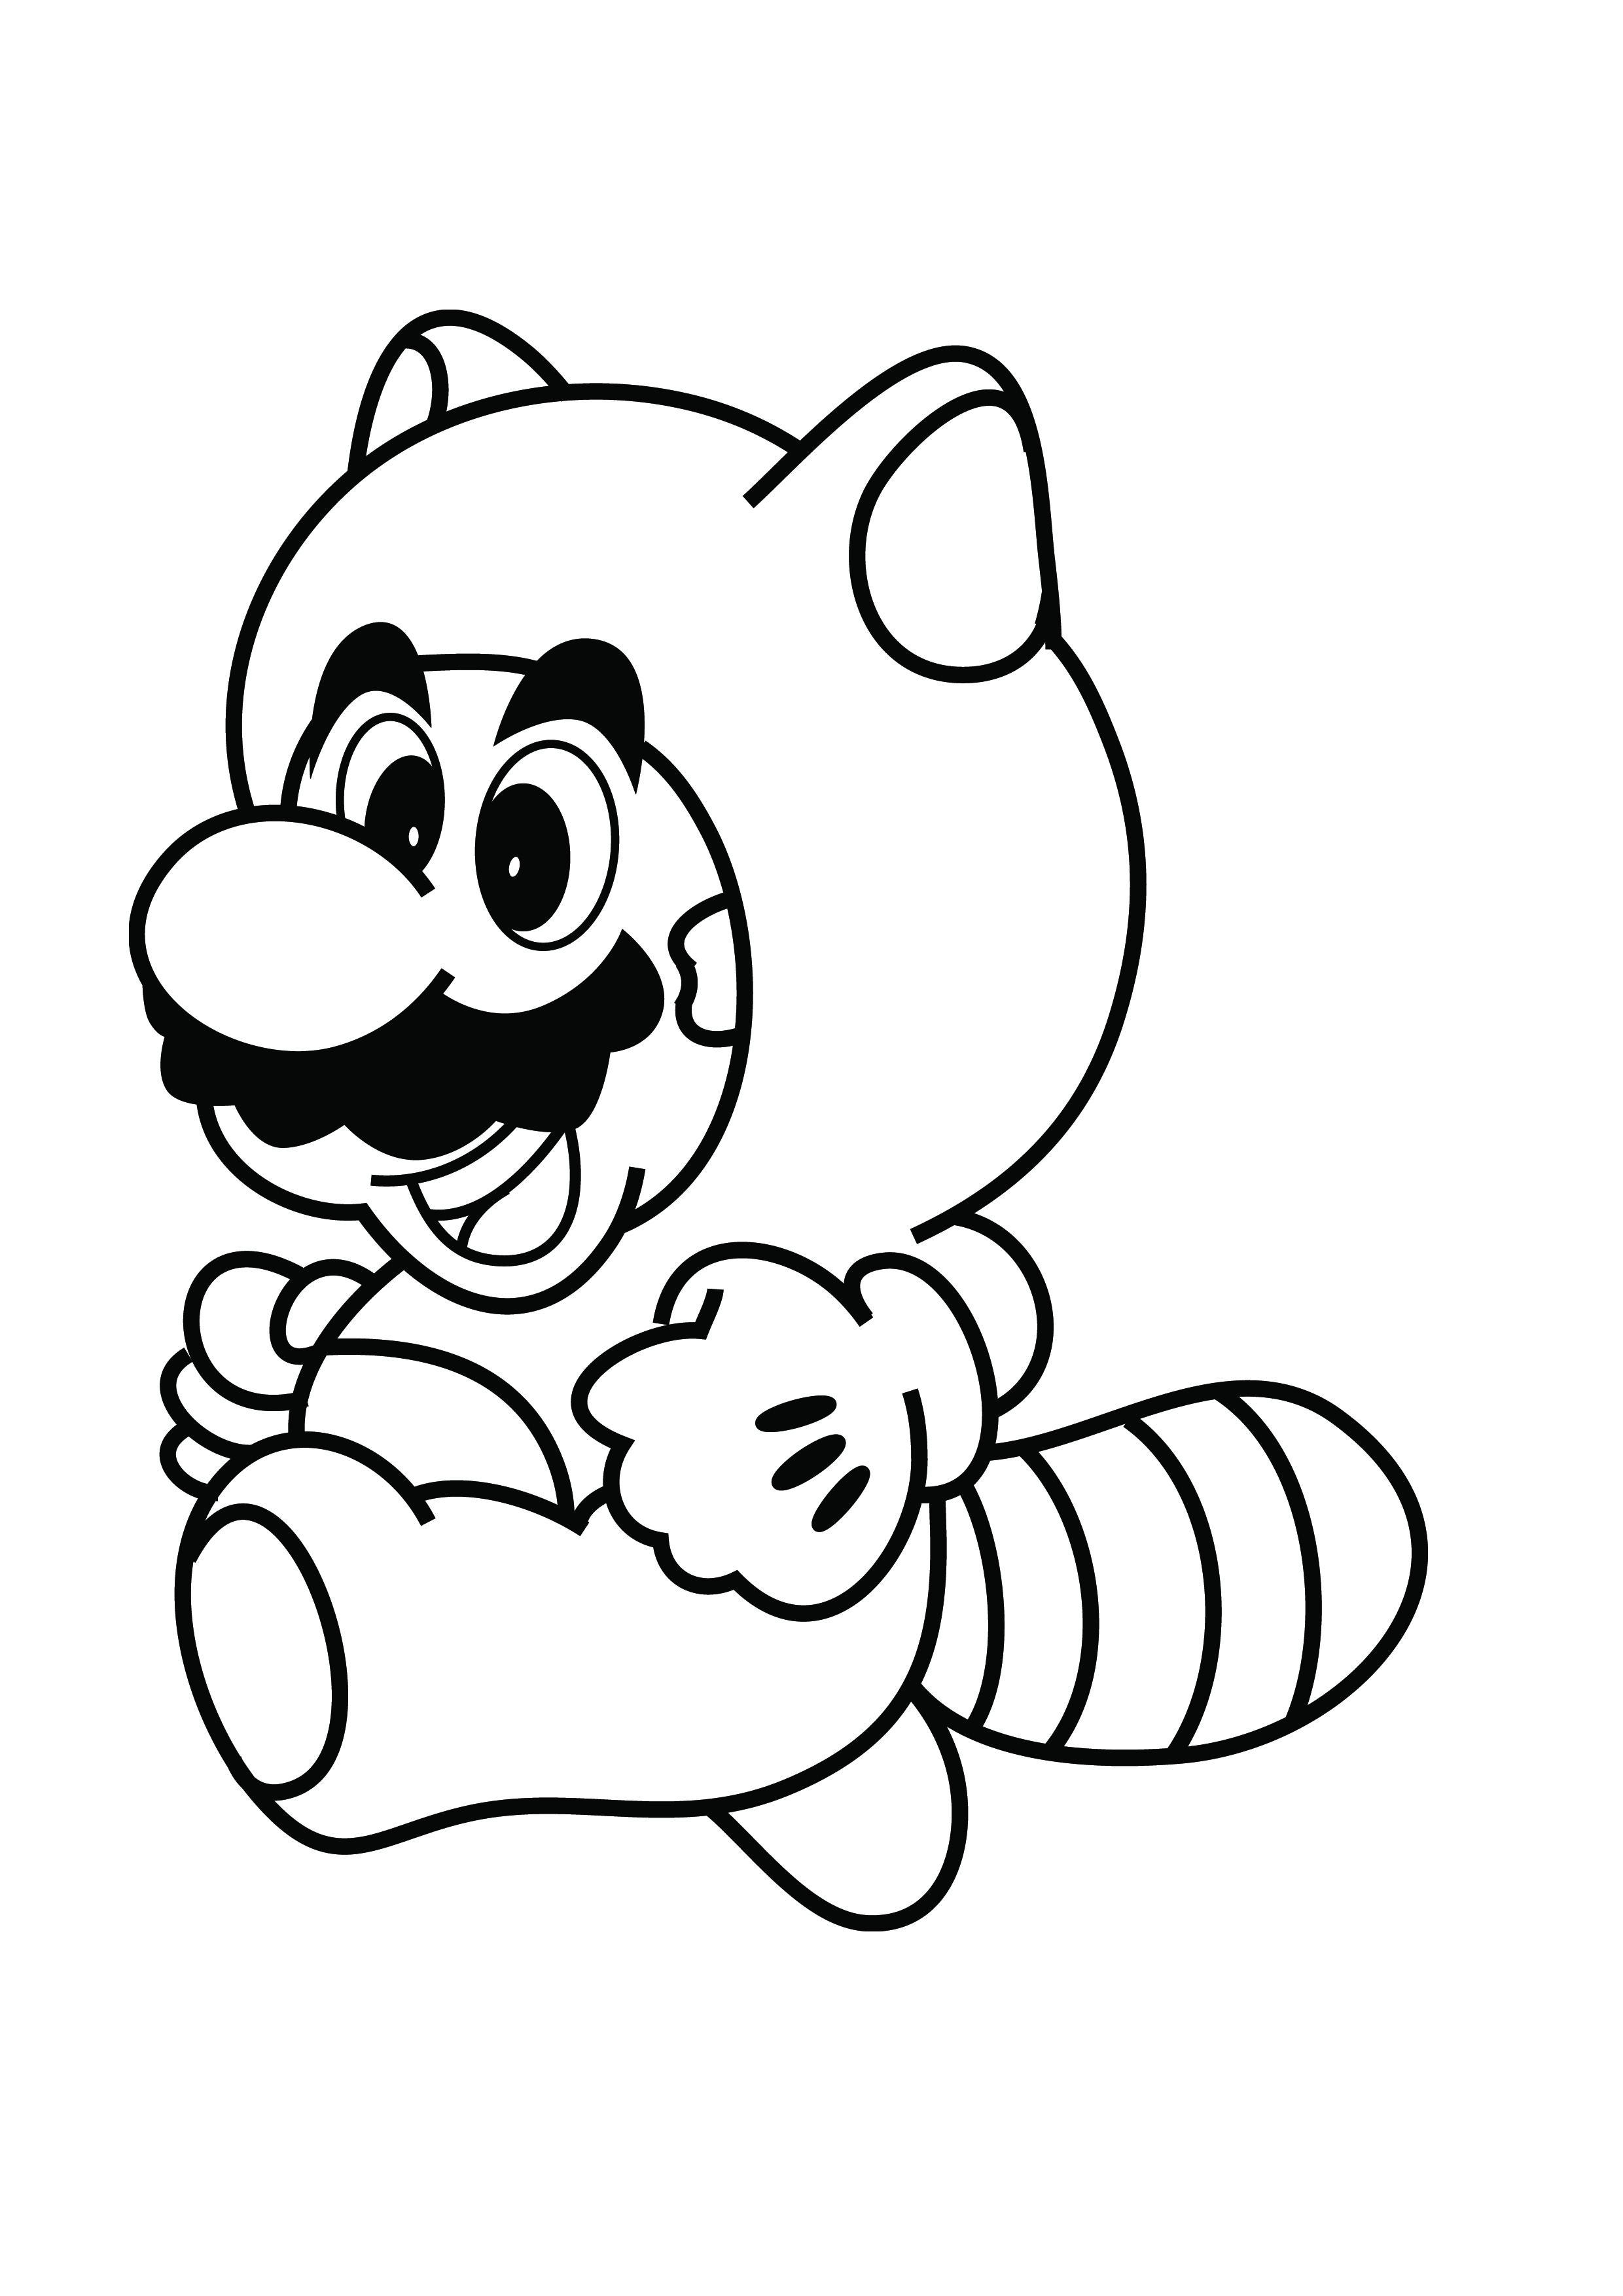 627 Animal Mario Coloring Pages Online Free with Animal character